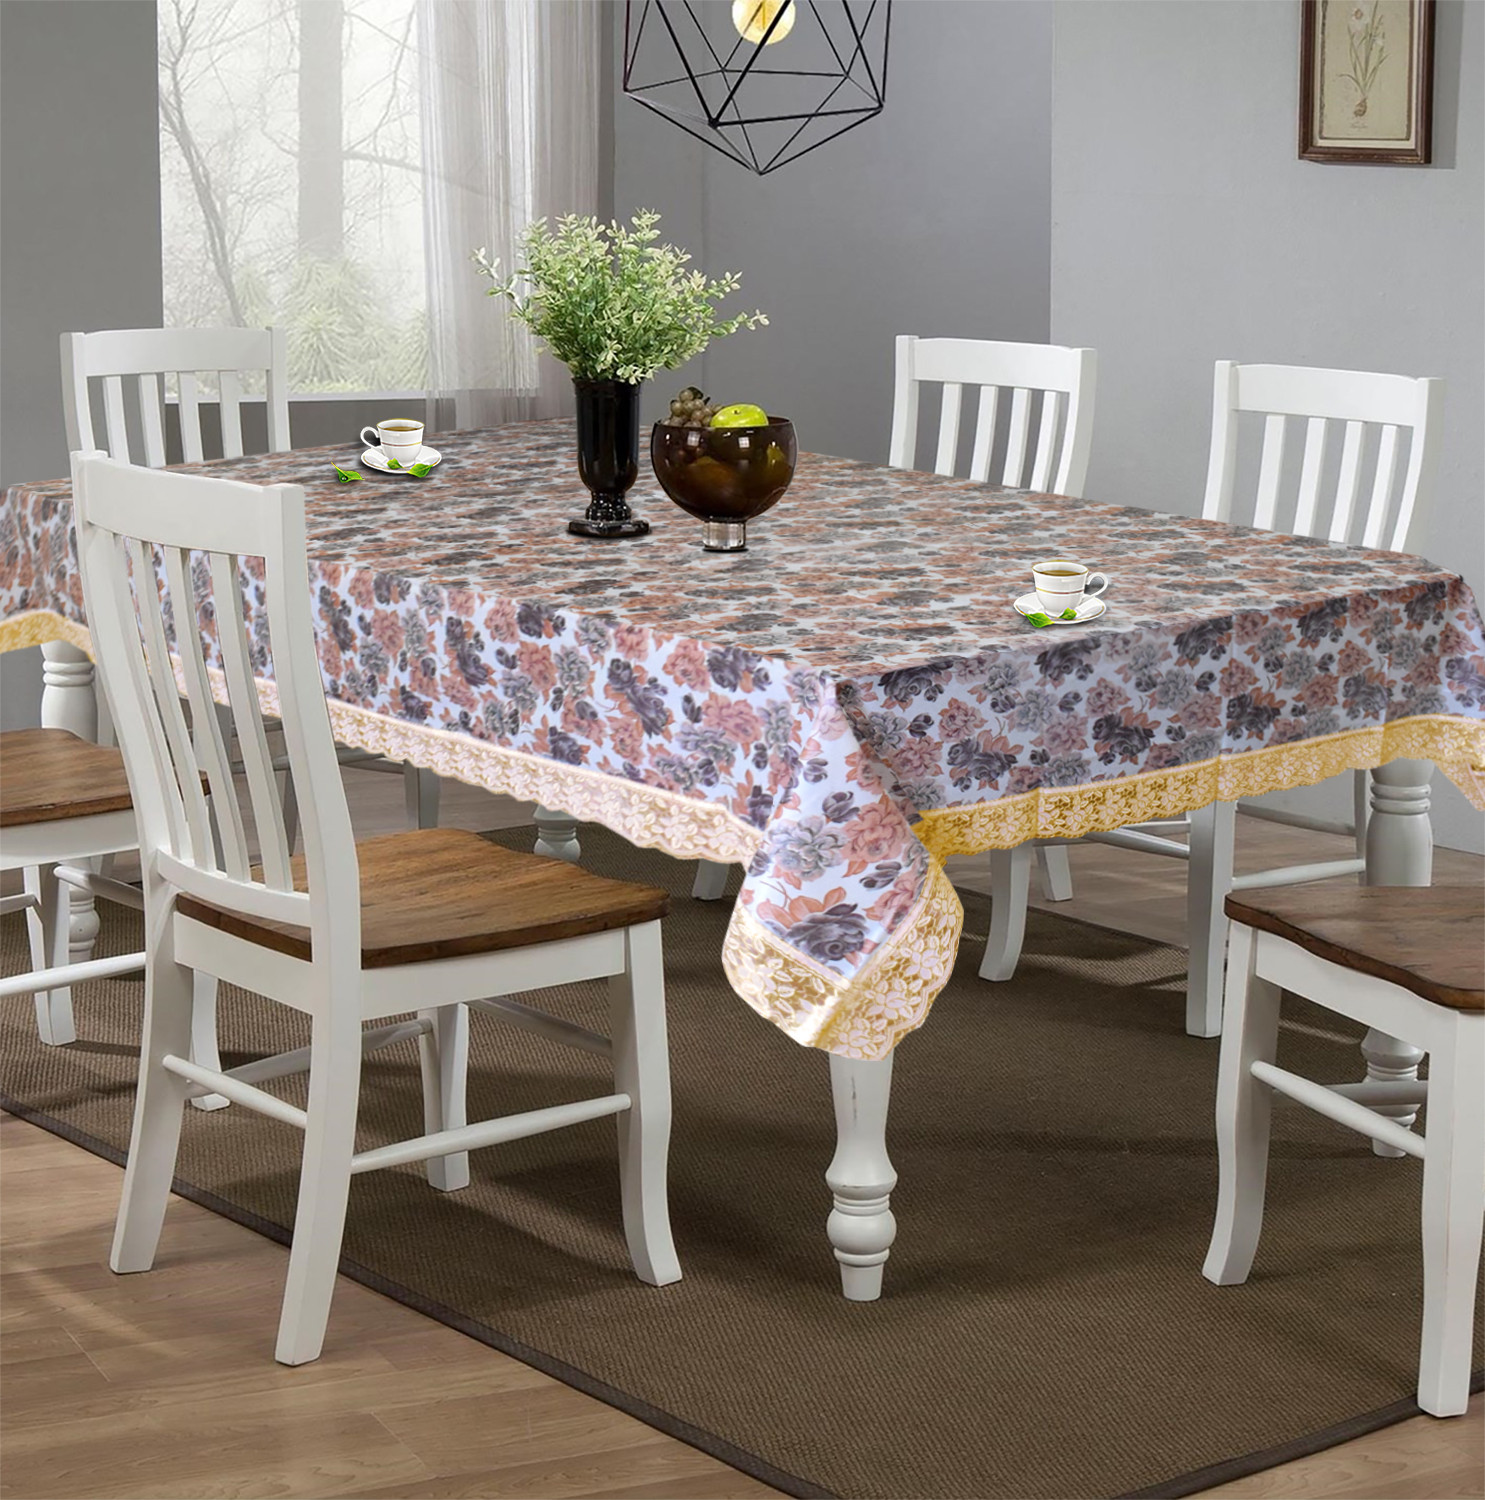 Kuber Industries Flower Printed PVC 6 Seater Dinning Table Cover, Protector With Gold Lace Border, 60